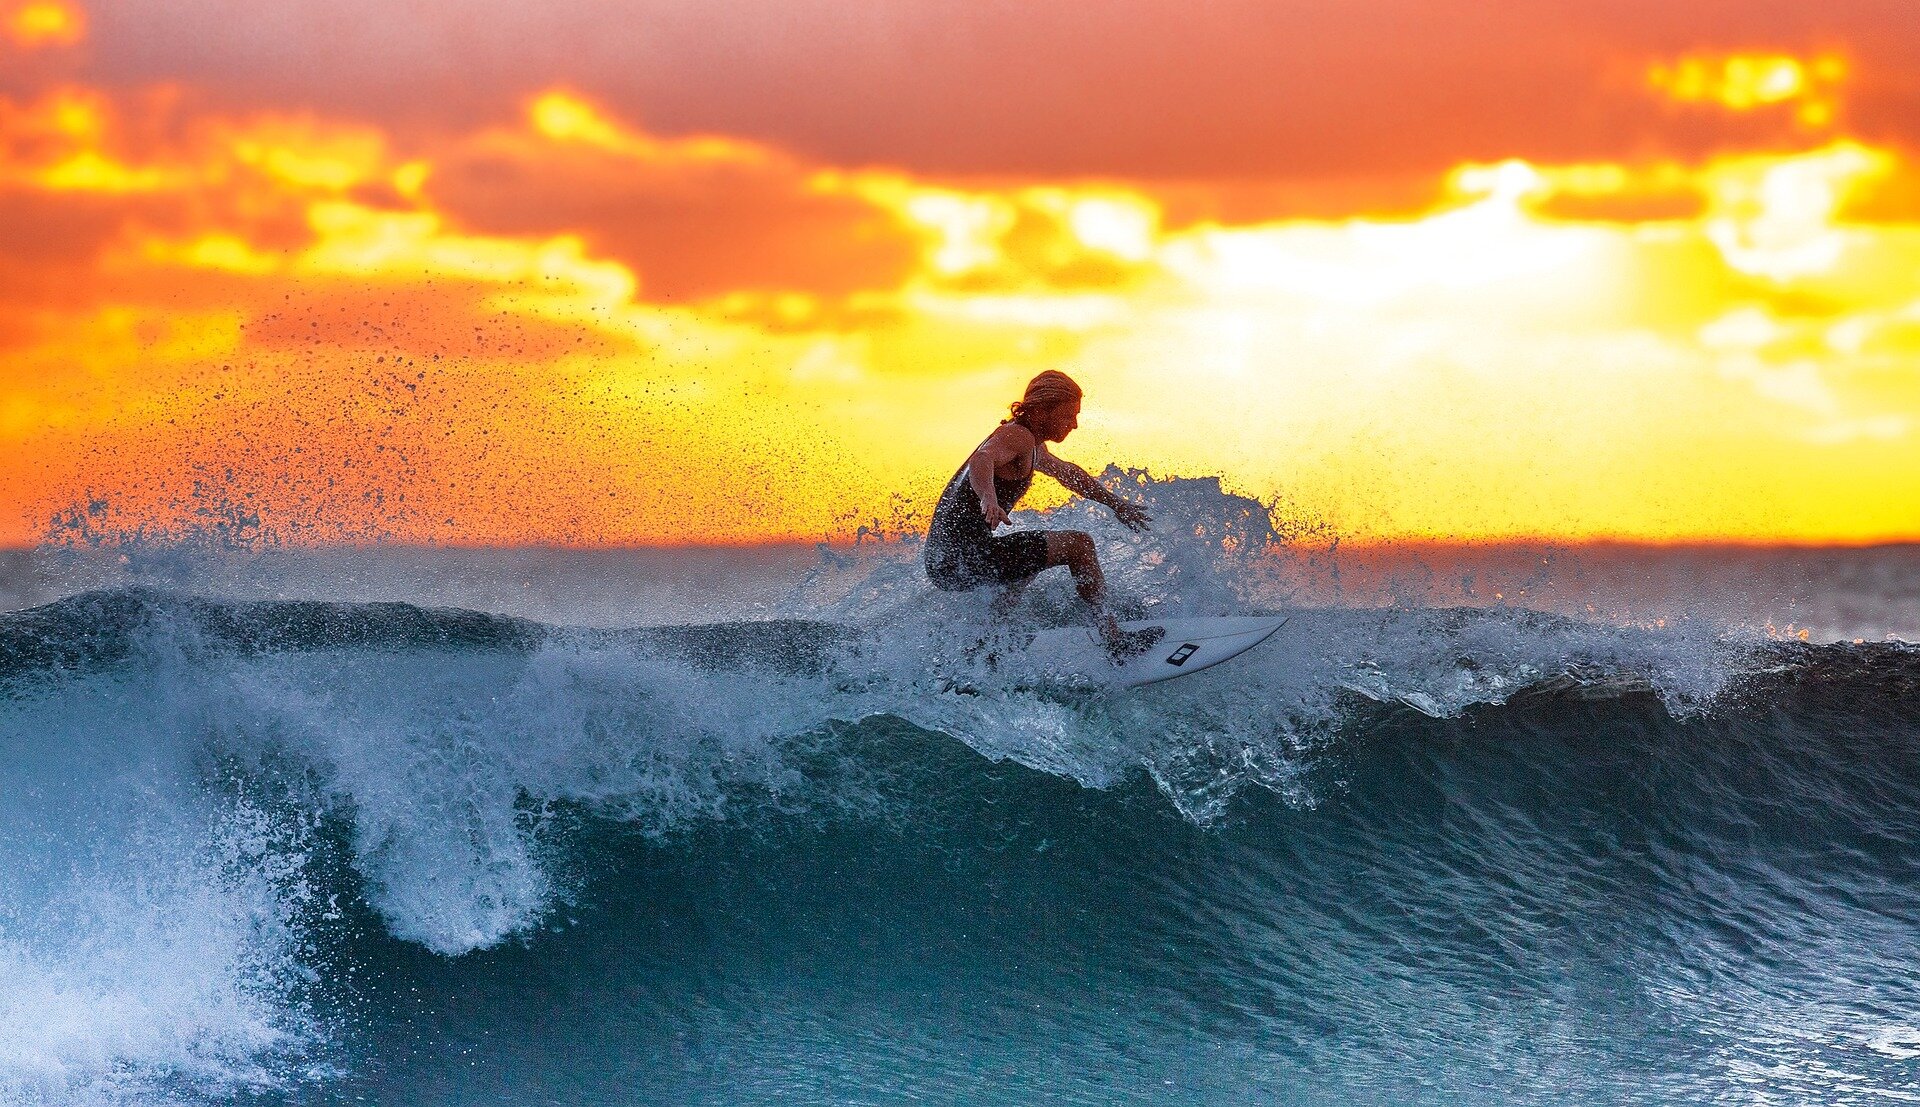 Study claims surfing creates  trillion wave for global economy by improving mental health